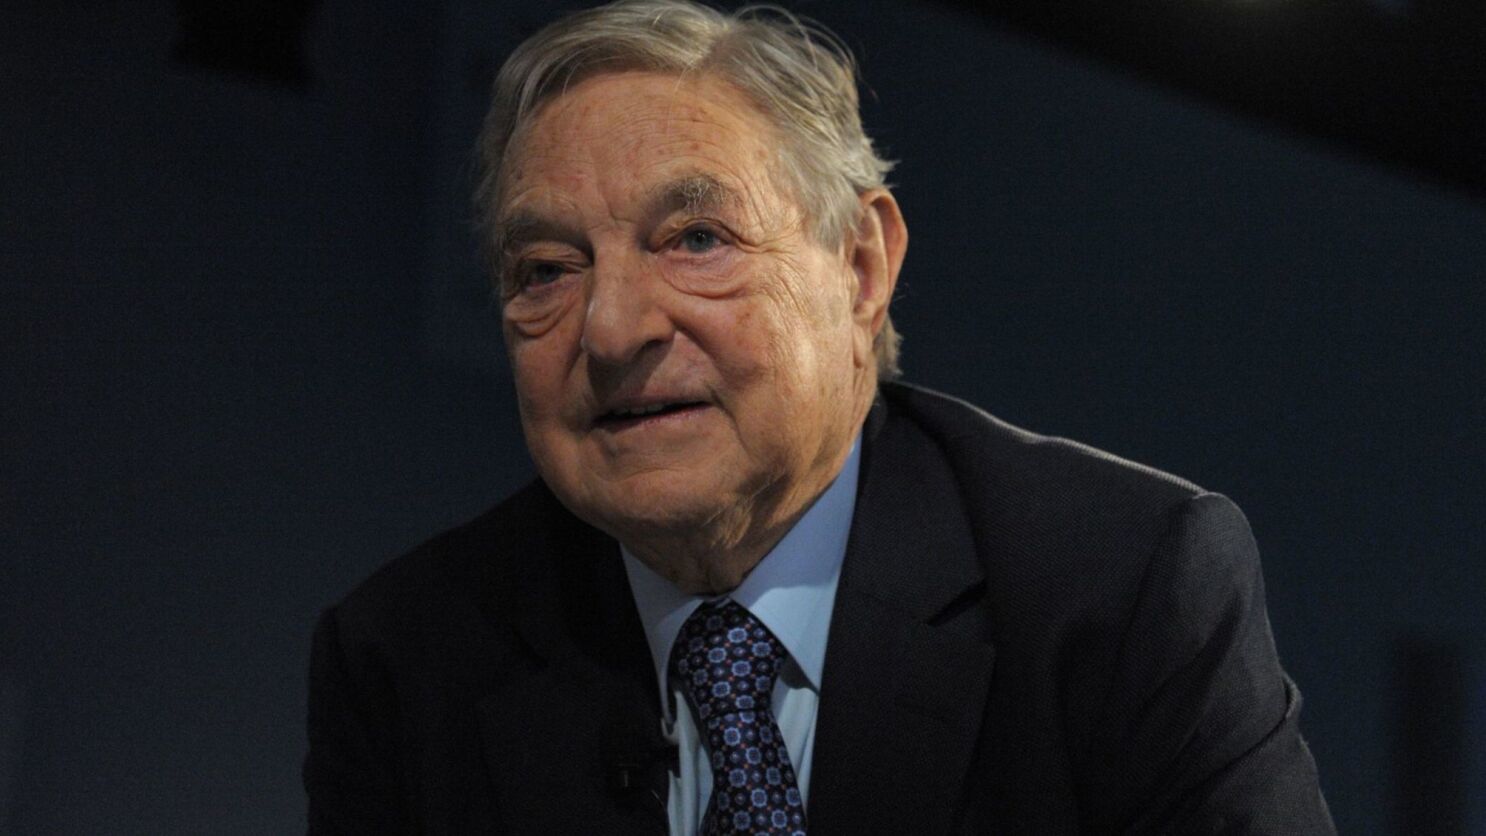 Explosive device found near George Soros' home, authorities say Angeles Times